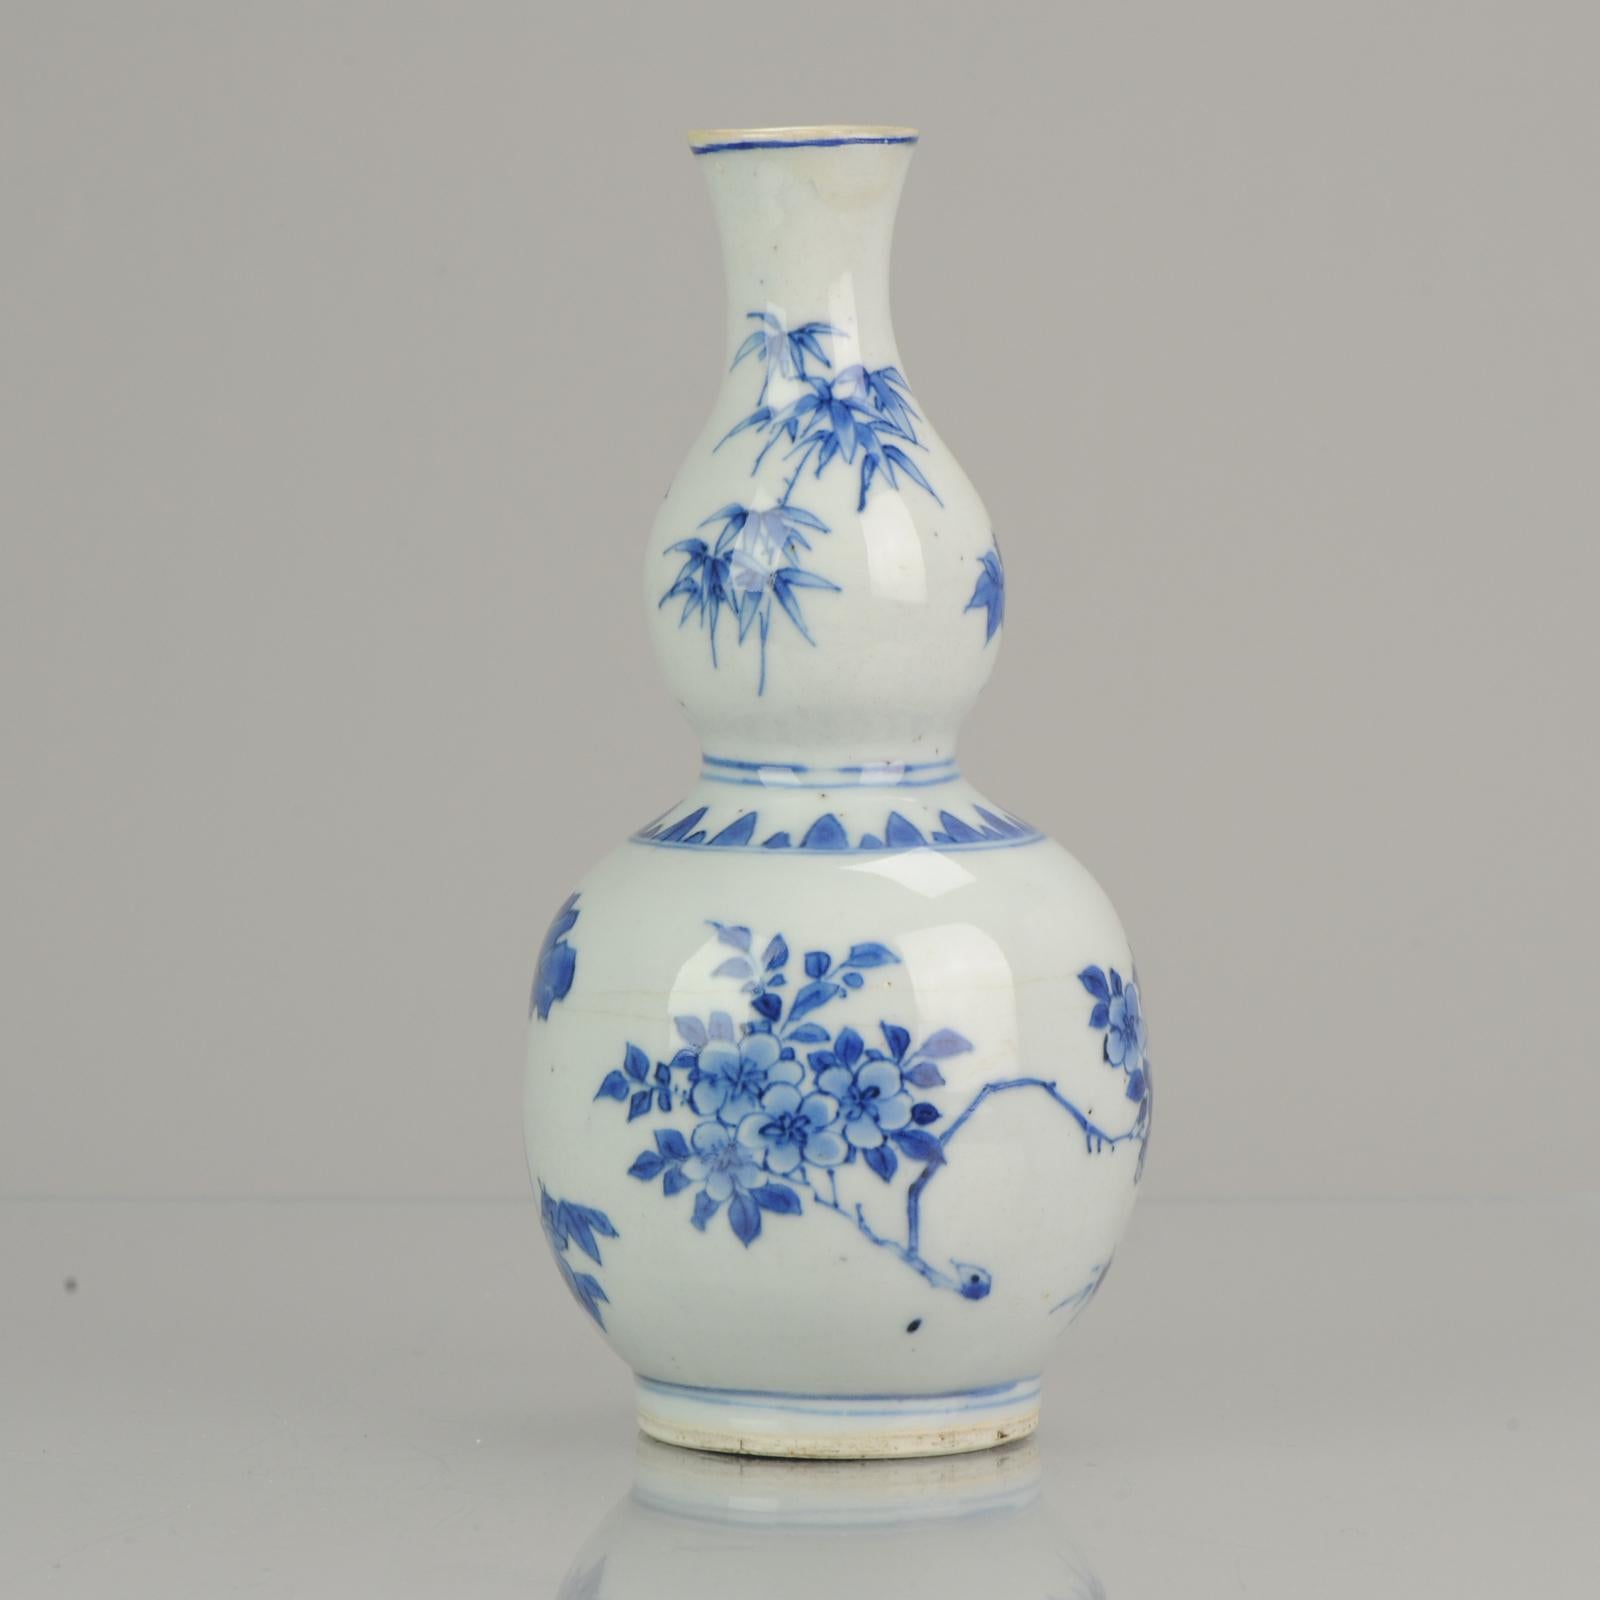 Ming Top Quality Chinese Porcelain 17th C Transitional Double Gourd Vase, China